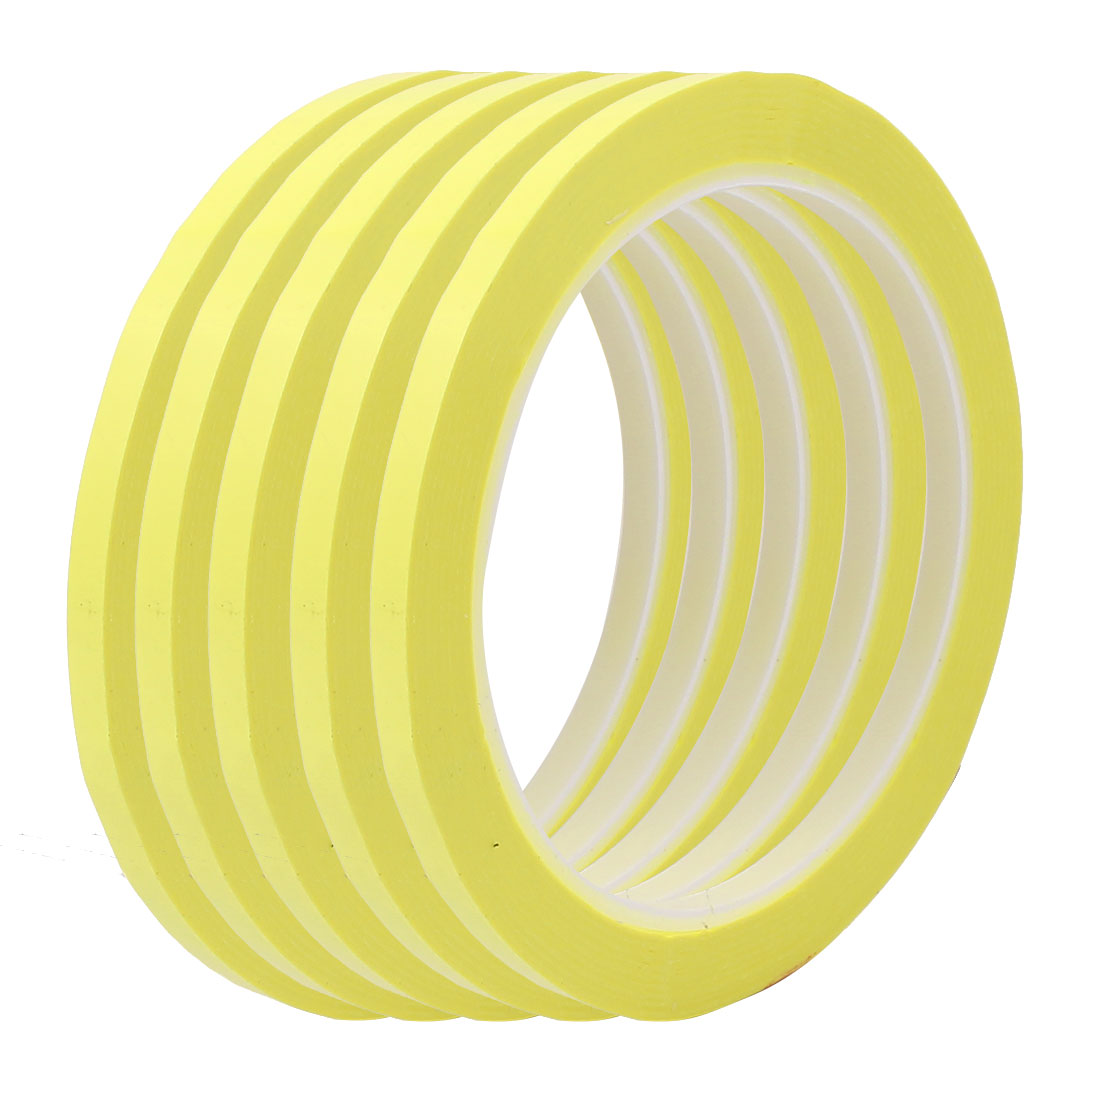 uxcell Uxcell 5 Pcs 5mm Single Sided Strong Self Adhesive Mylar Tape 50M Length Yellow